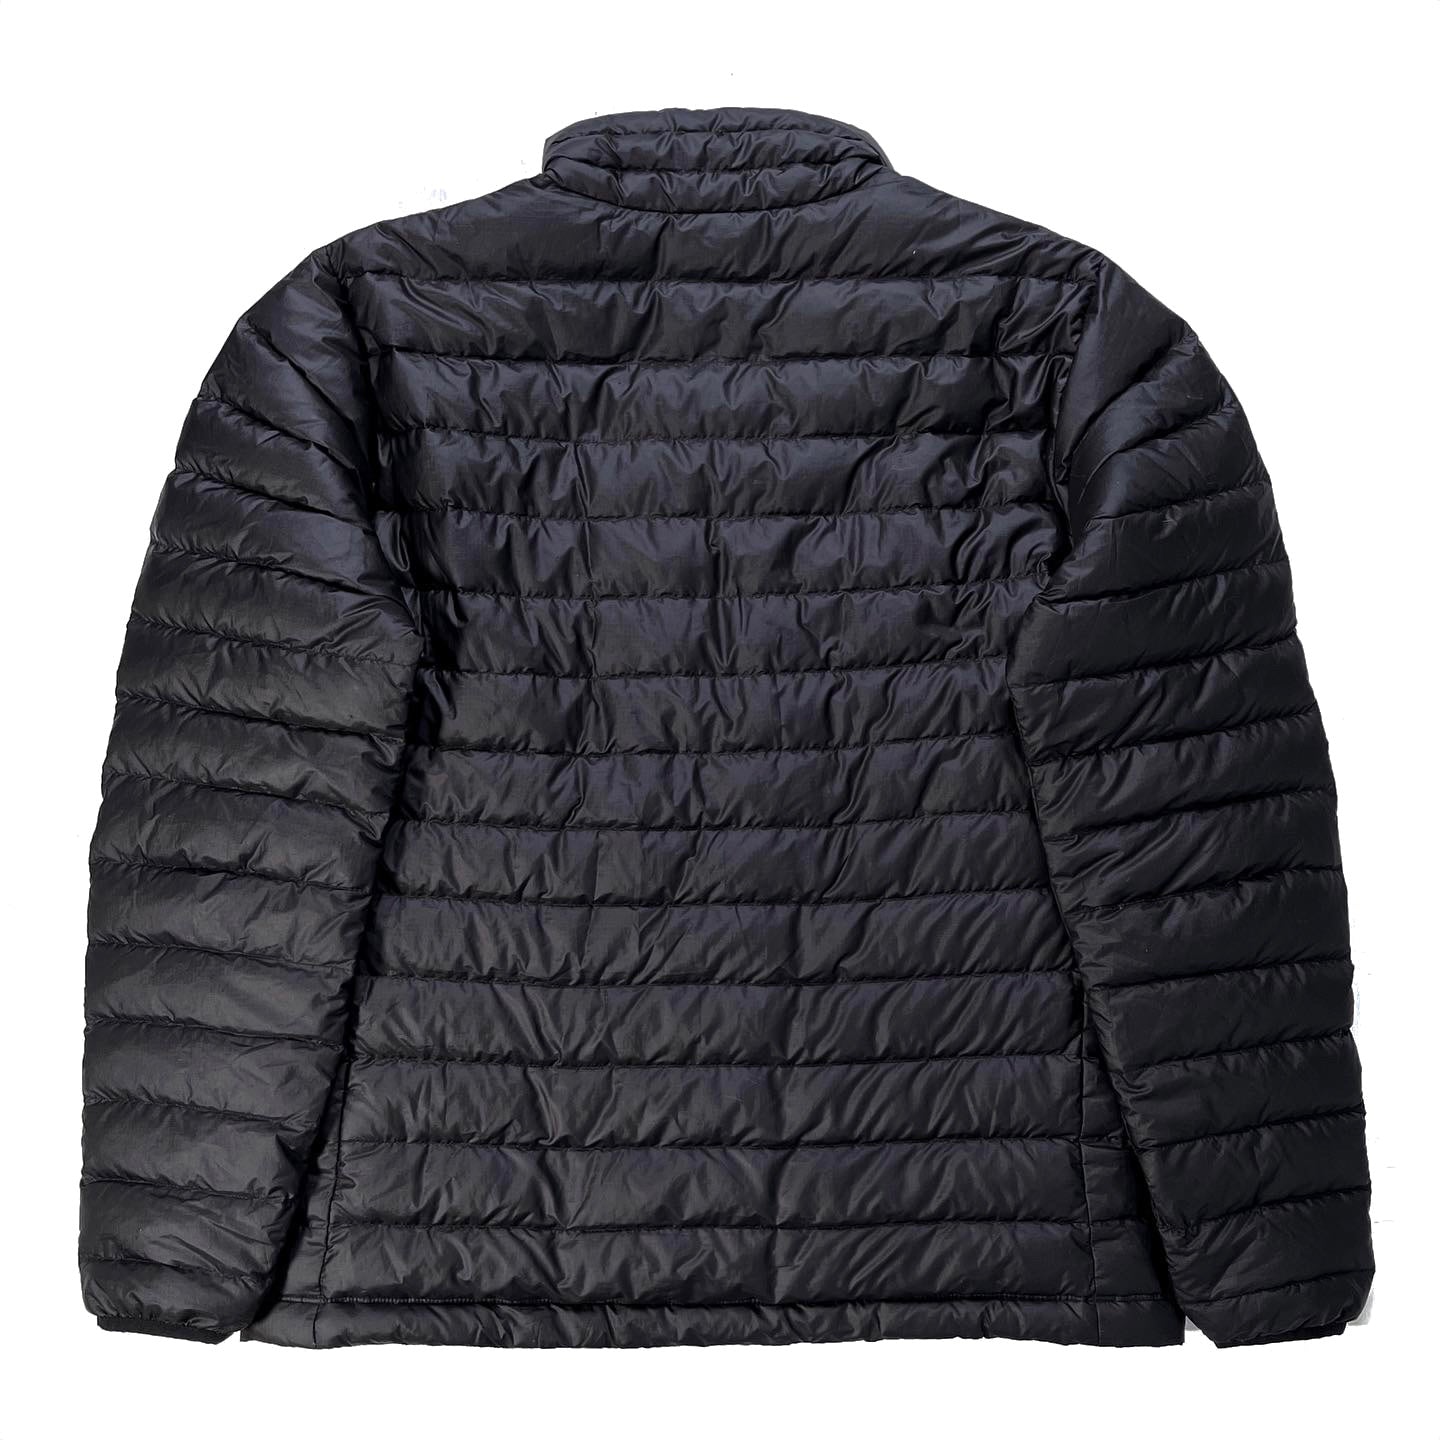 2021 Patagonia Mens Recycled Polyester Down Jacket, Black (L)